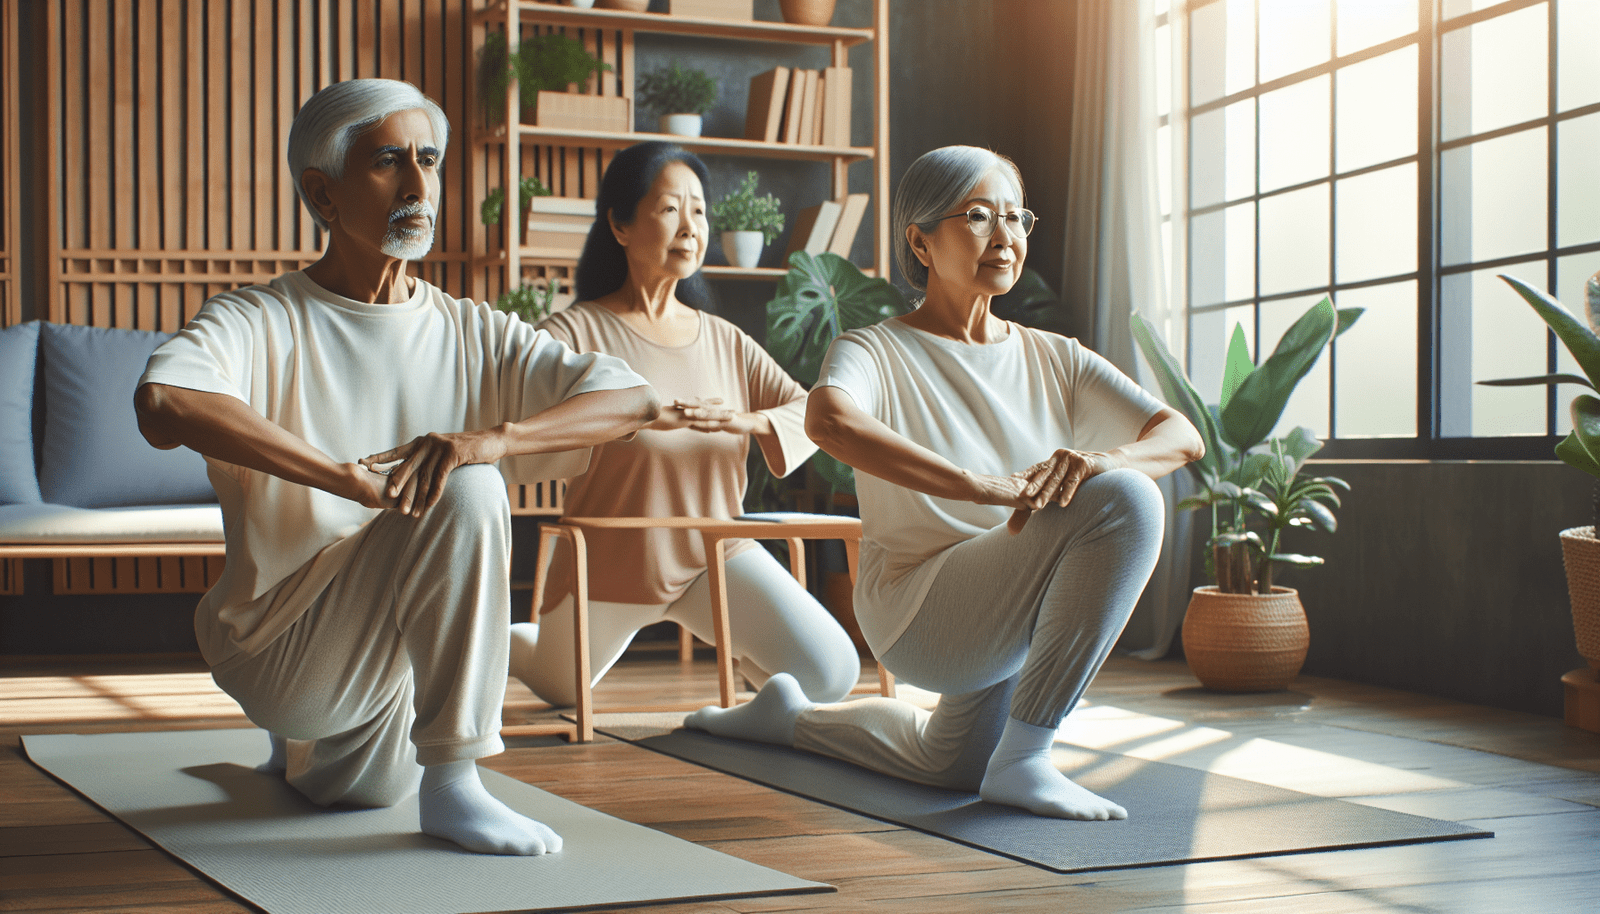 How Can I Create A Home Yoga Practice If I’m A Senior?